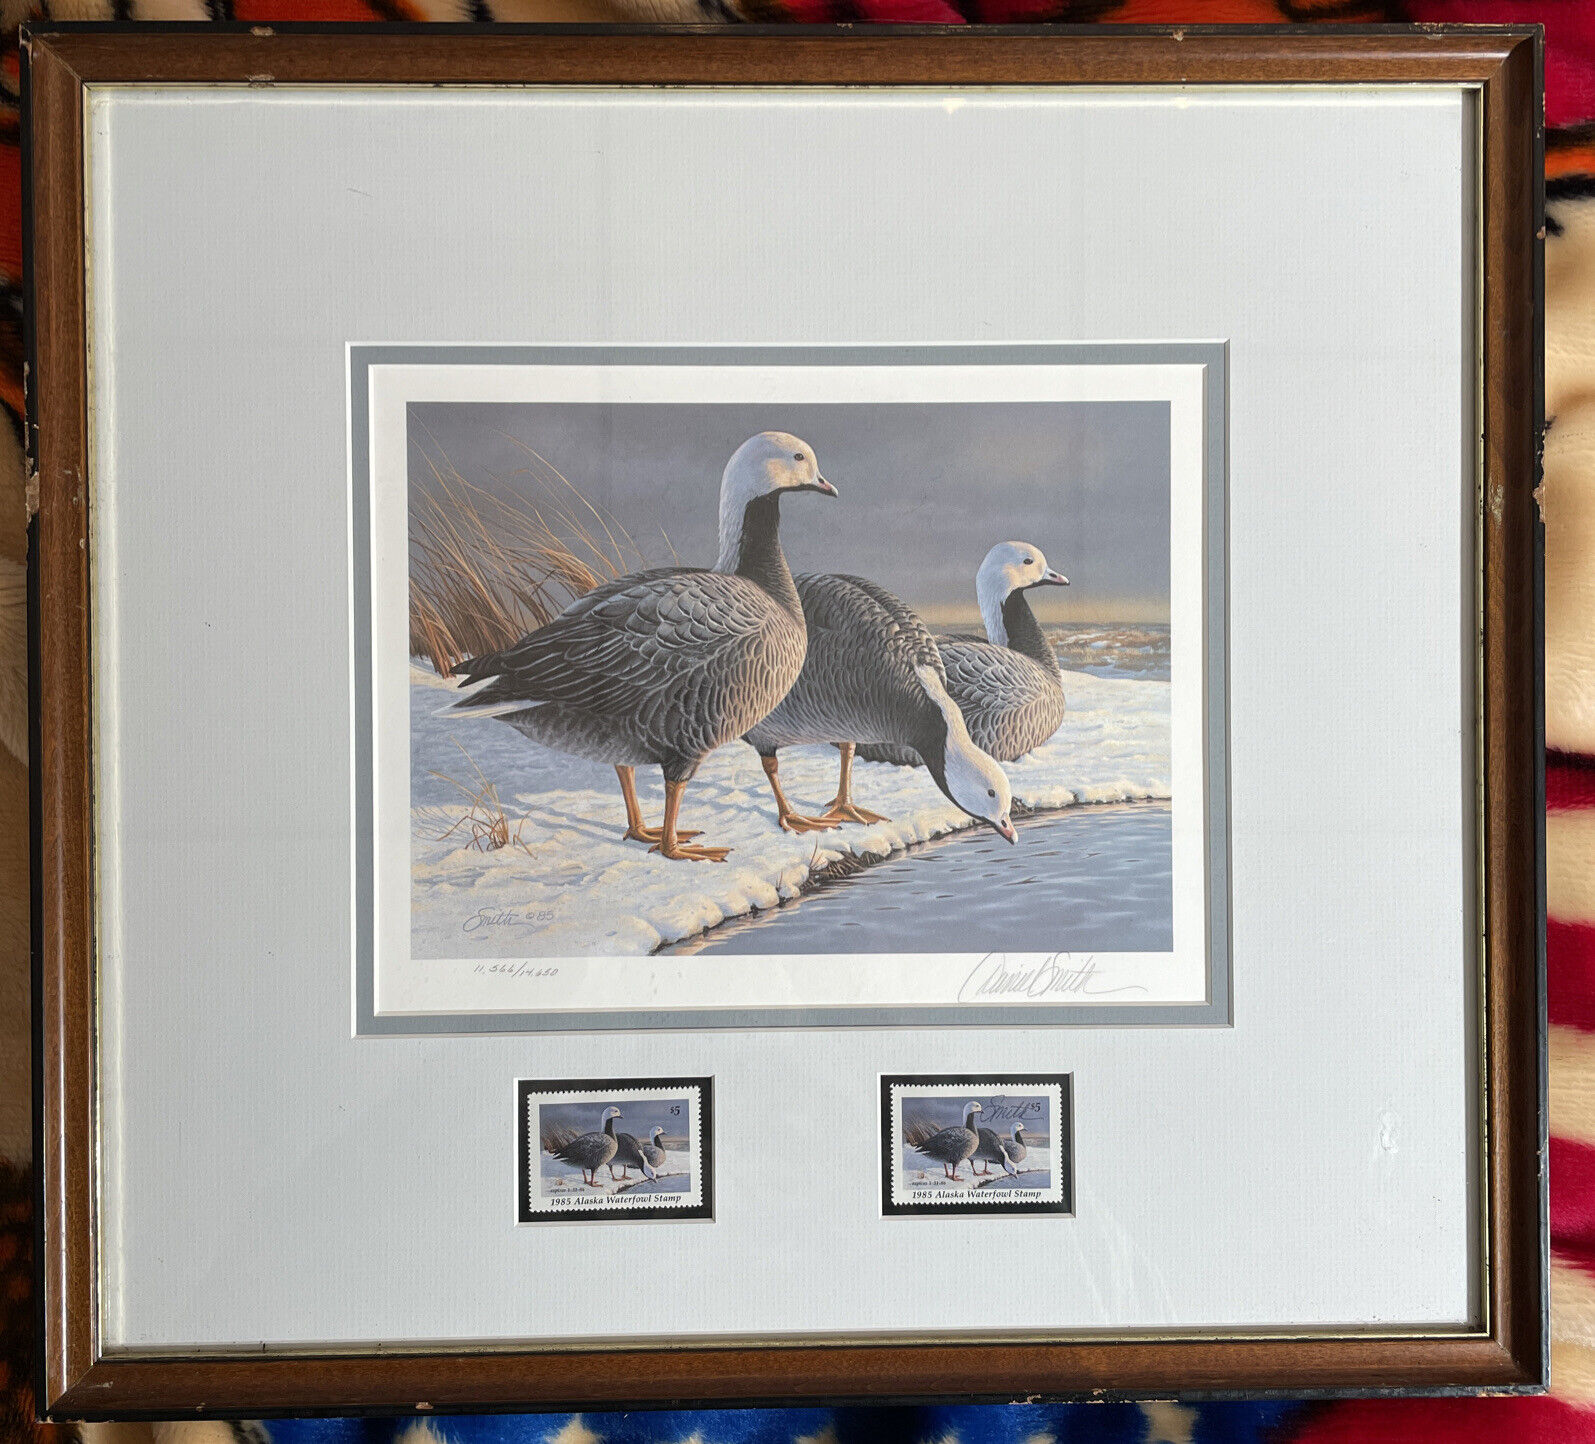 1985 Alaska Waterfowl Stamp and Print signed by Daniel Smith Framed